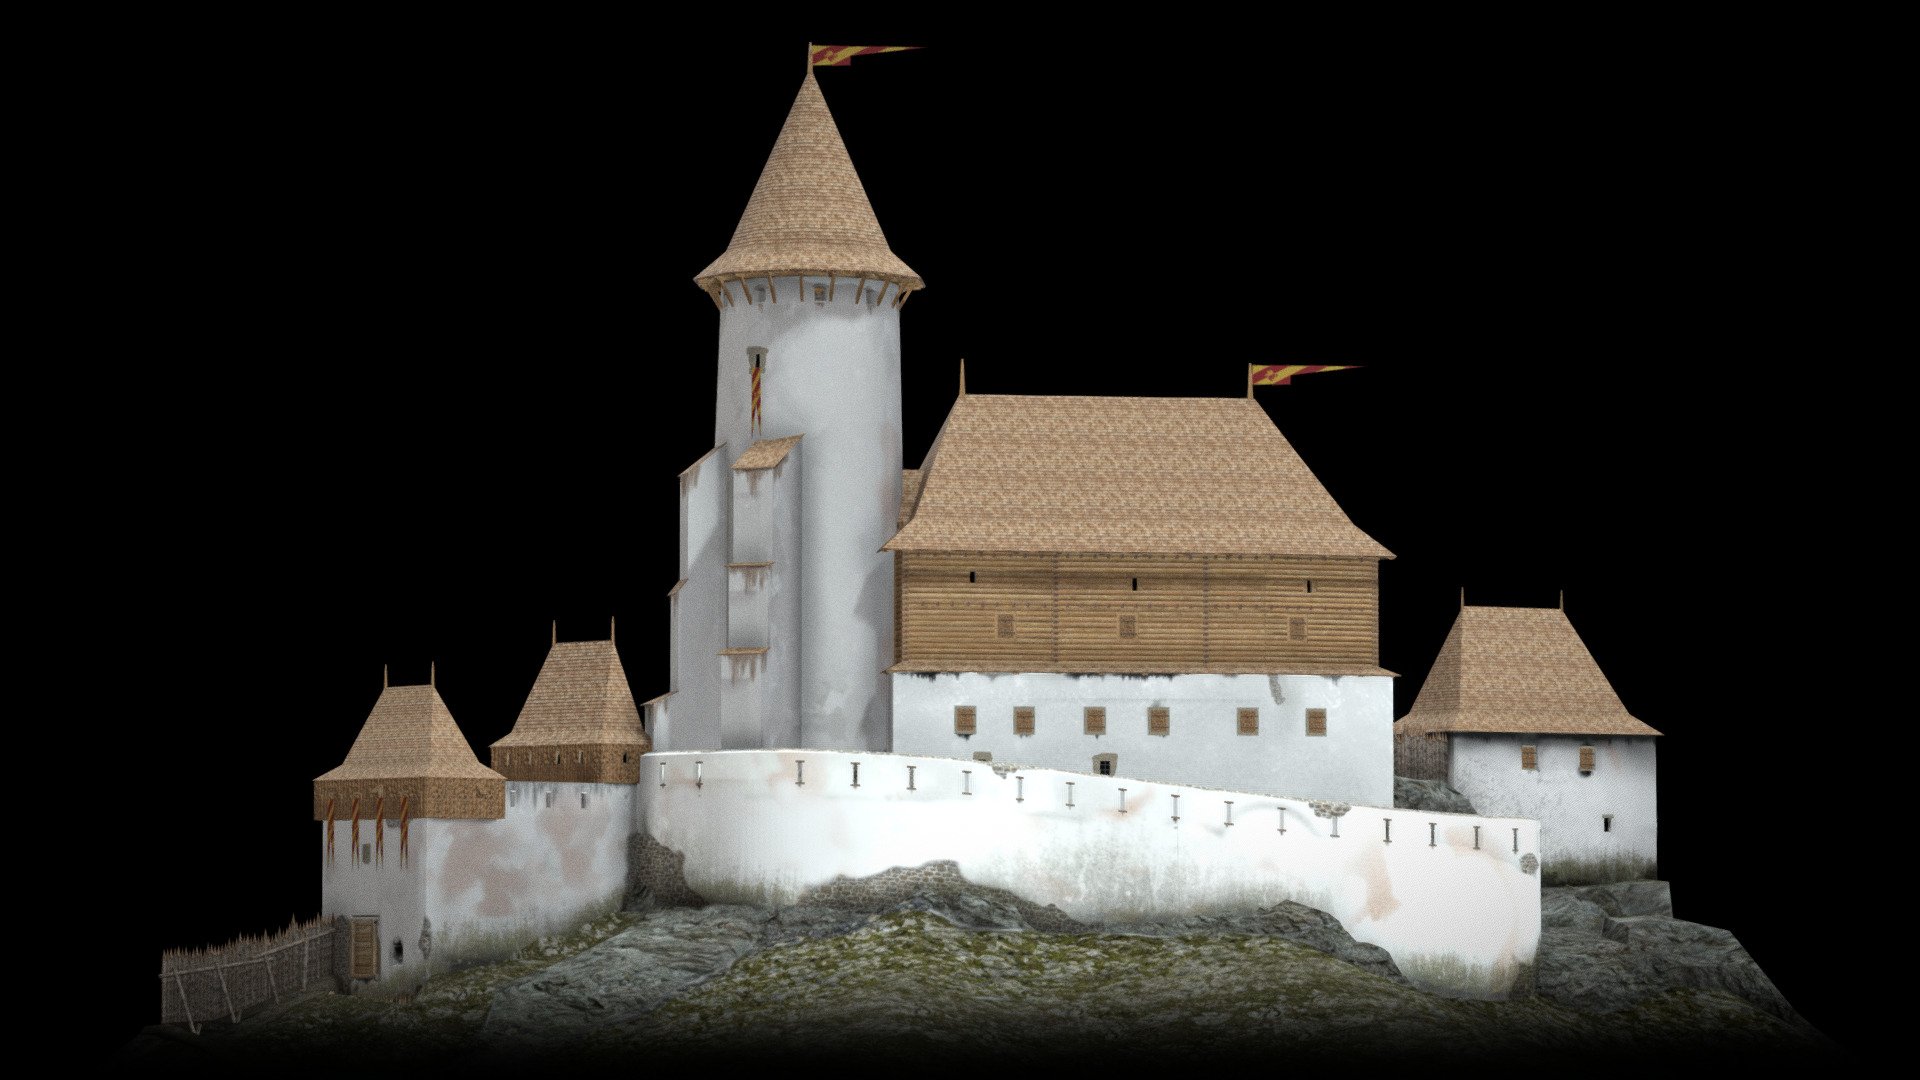 This medieval castle stands in central Slovakia. This is its castles core at the late Gothic period. Whole animation of construction is presented at an exhibition in the holographic pyramid at Stará lubovňa exhibition. The model has modeled interiors, which are not published in this model - maybe later&hellip; 

project page: https://community.foundry.com/portfolio/32561/medieval-castle
youtube: https://www.youtube.com/playlist?list=PLkDfjdDpi15HNpDet42bsx1wI3frSV0lh
hologram: https://www.napalete.sk/hologram-na-lubovnianskom-hrade-ukaze-jeho-historiu/

mapa: https://mapy.cz/s/fozuhebadu - The Castle: Stará Lubovňa - 3D model by Tomáš Musílek (@parleur) 3d model